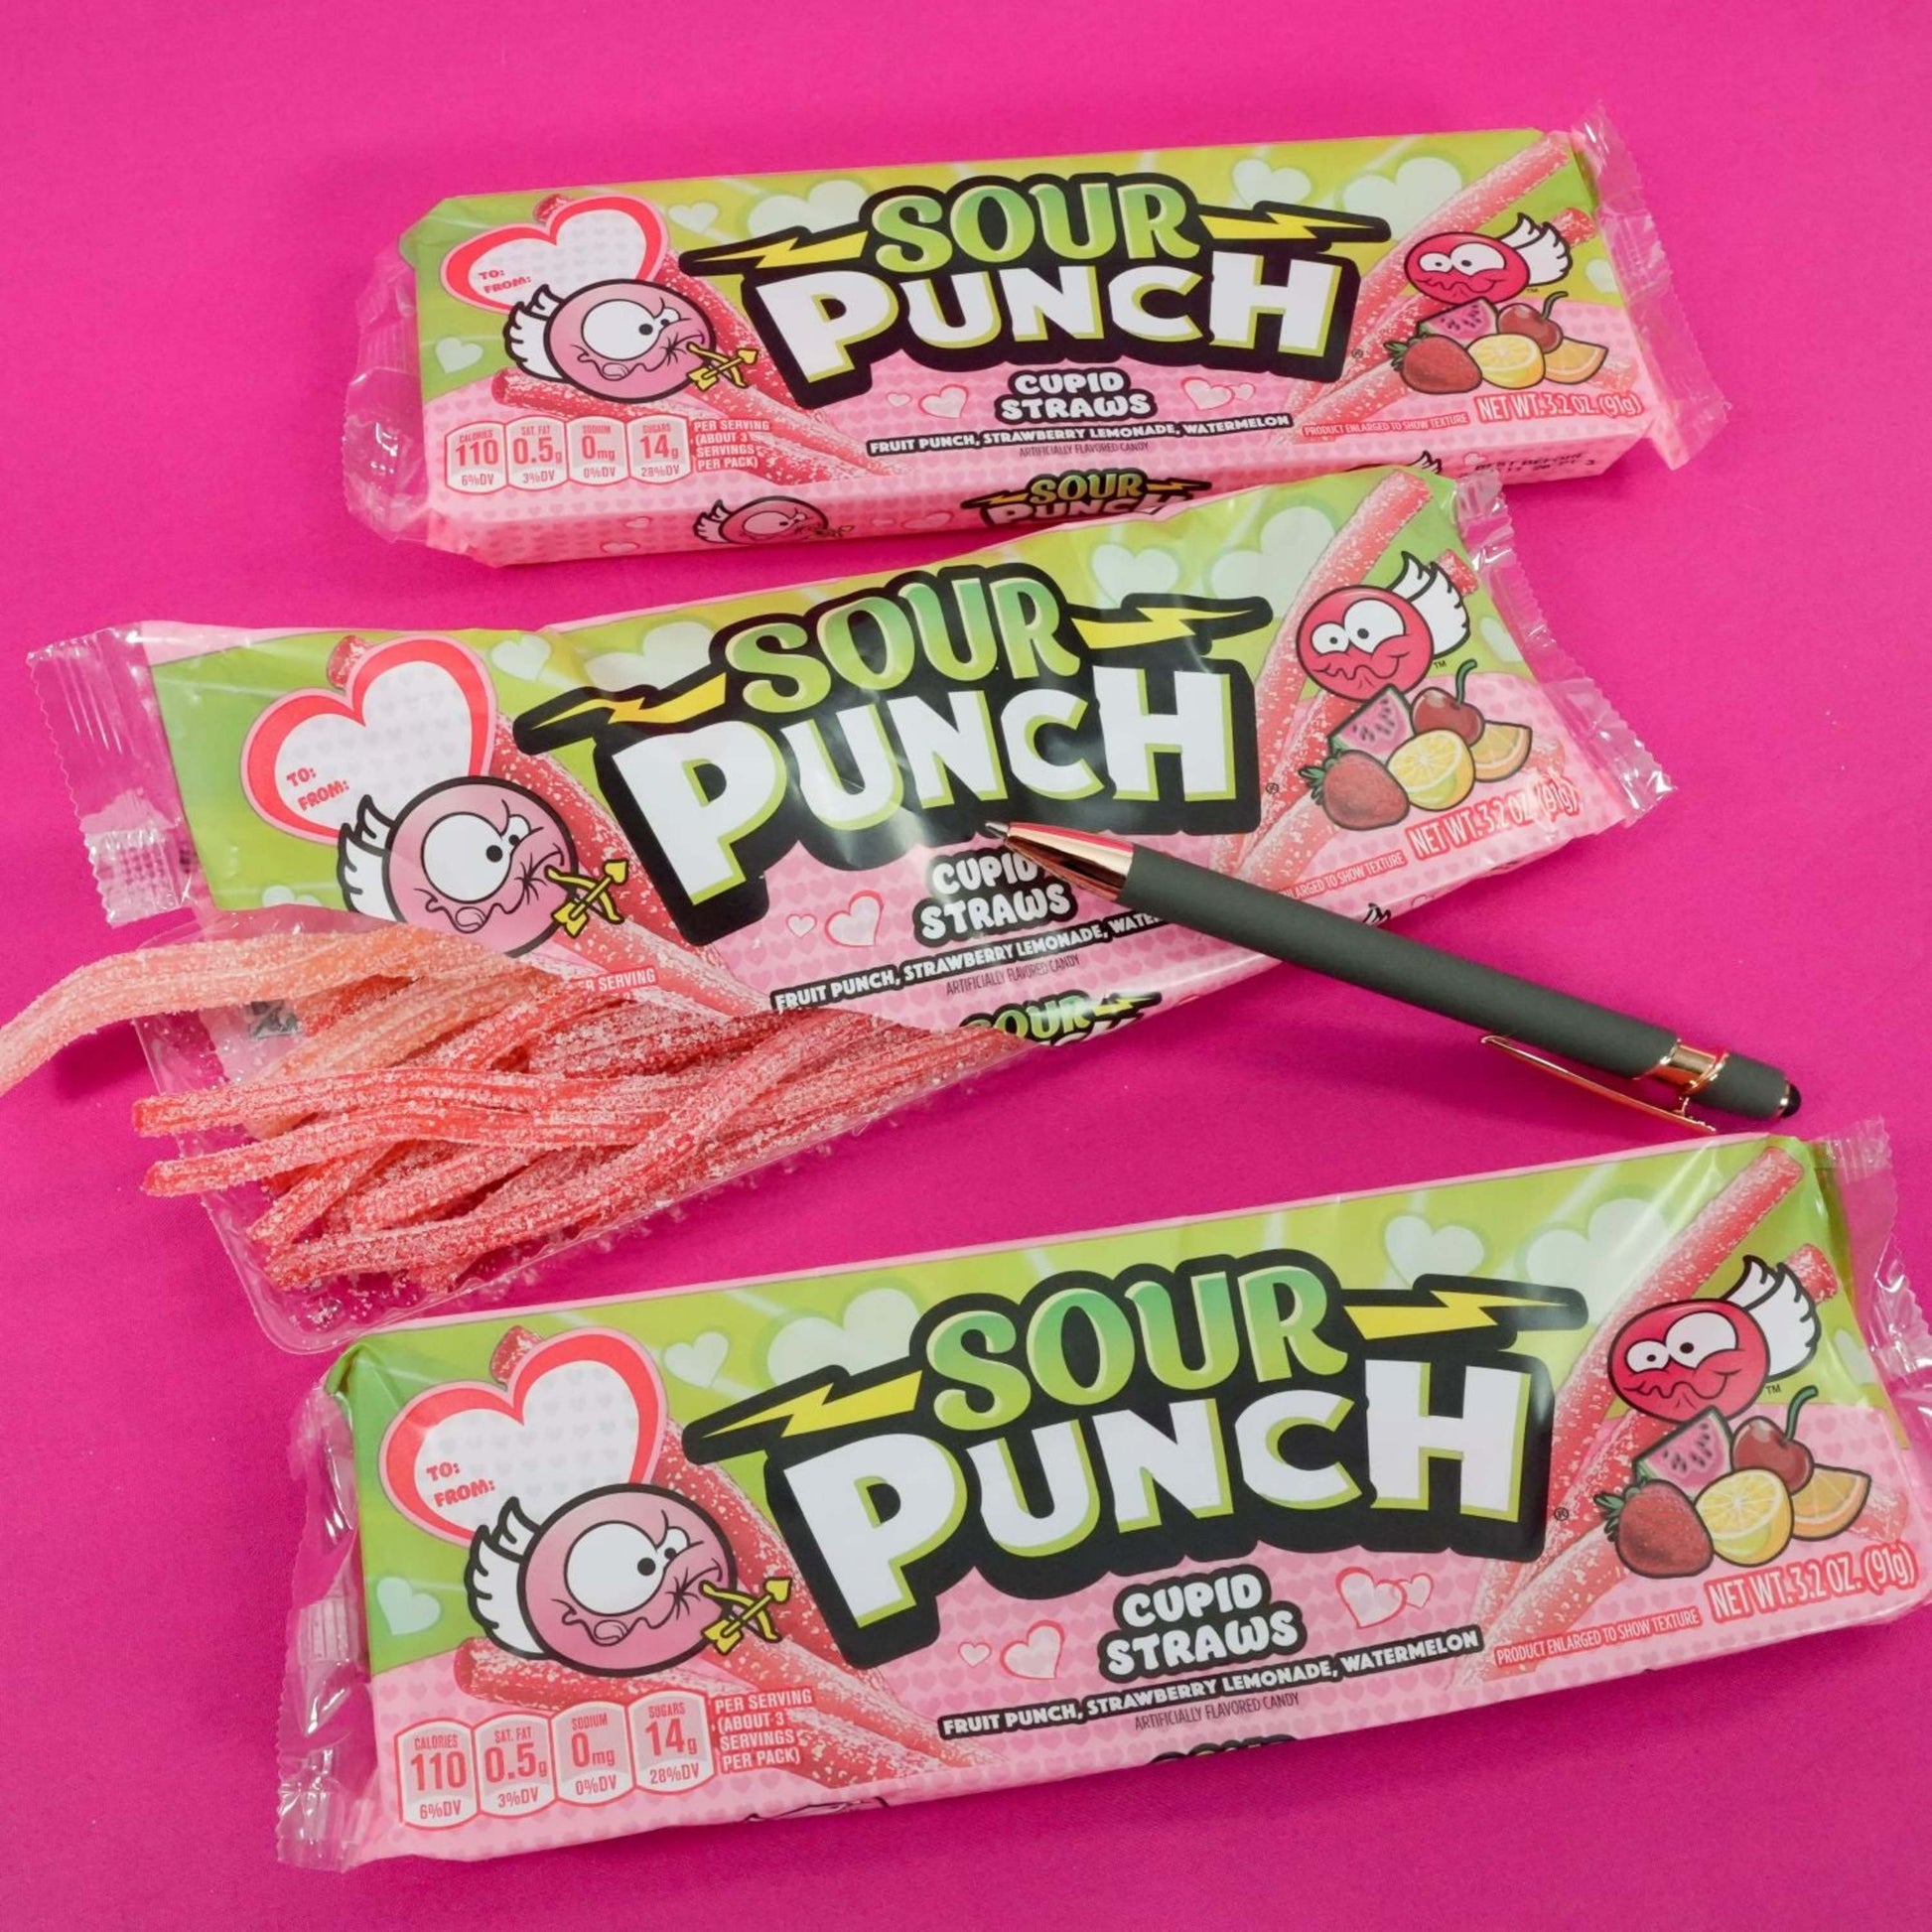 SOUR PUNCH Cupid Straws valentine candy trays on pink tablecloth with a pen